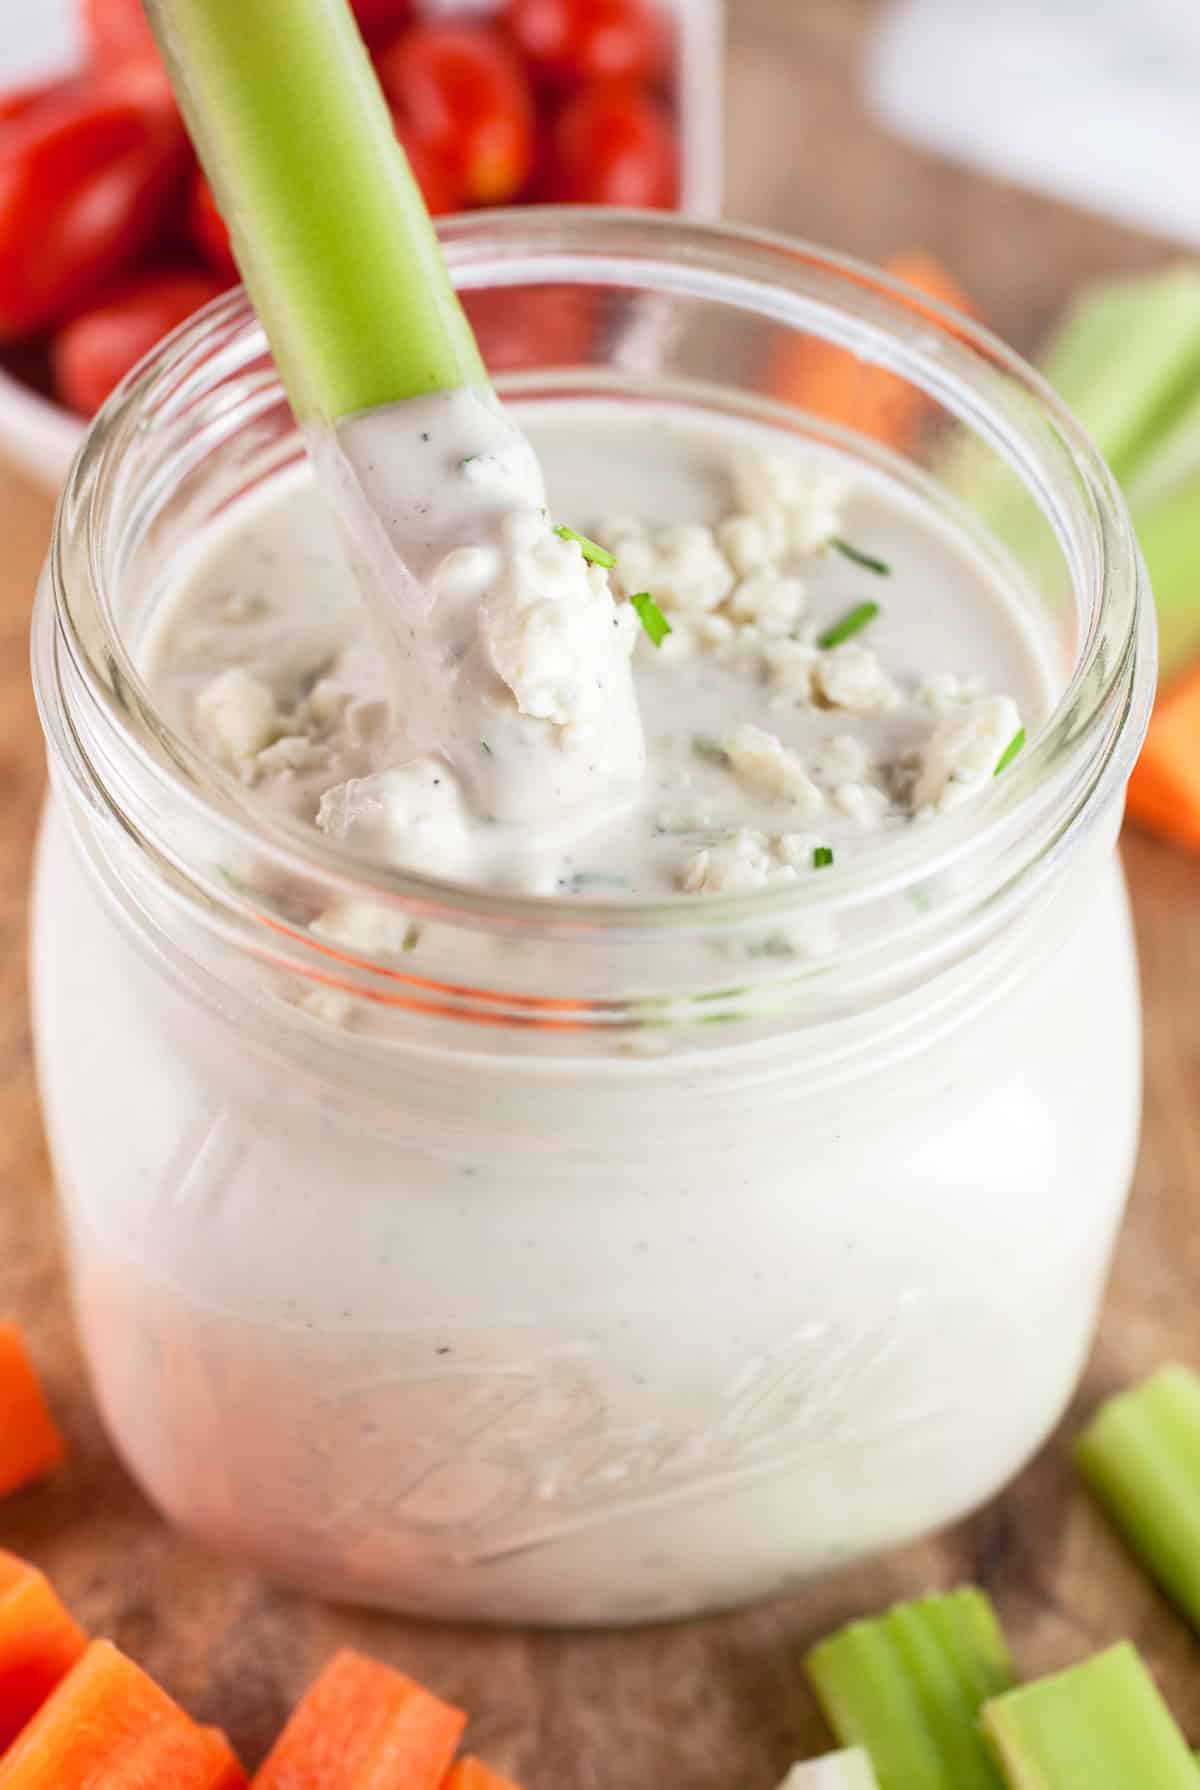 Celery stick dipped into jar of blue cheese dressing sitting on a wooden board with raw veggies.